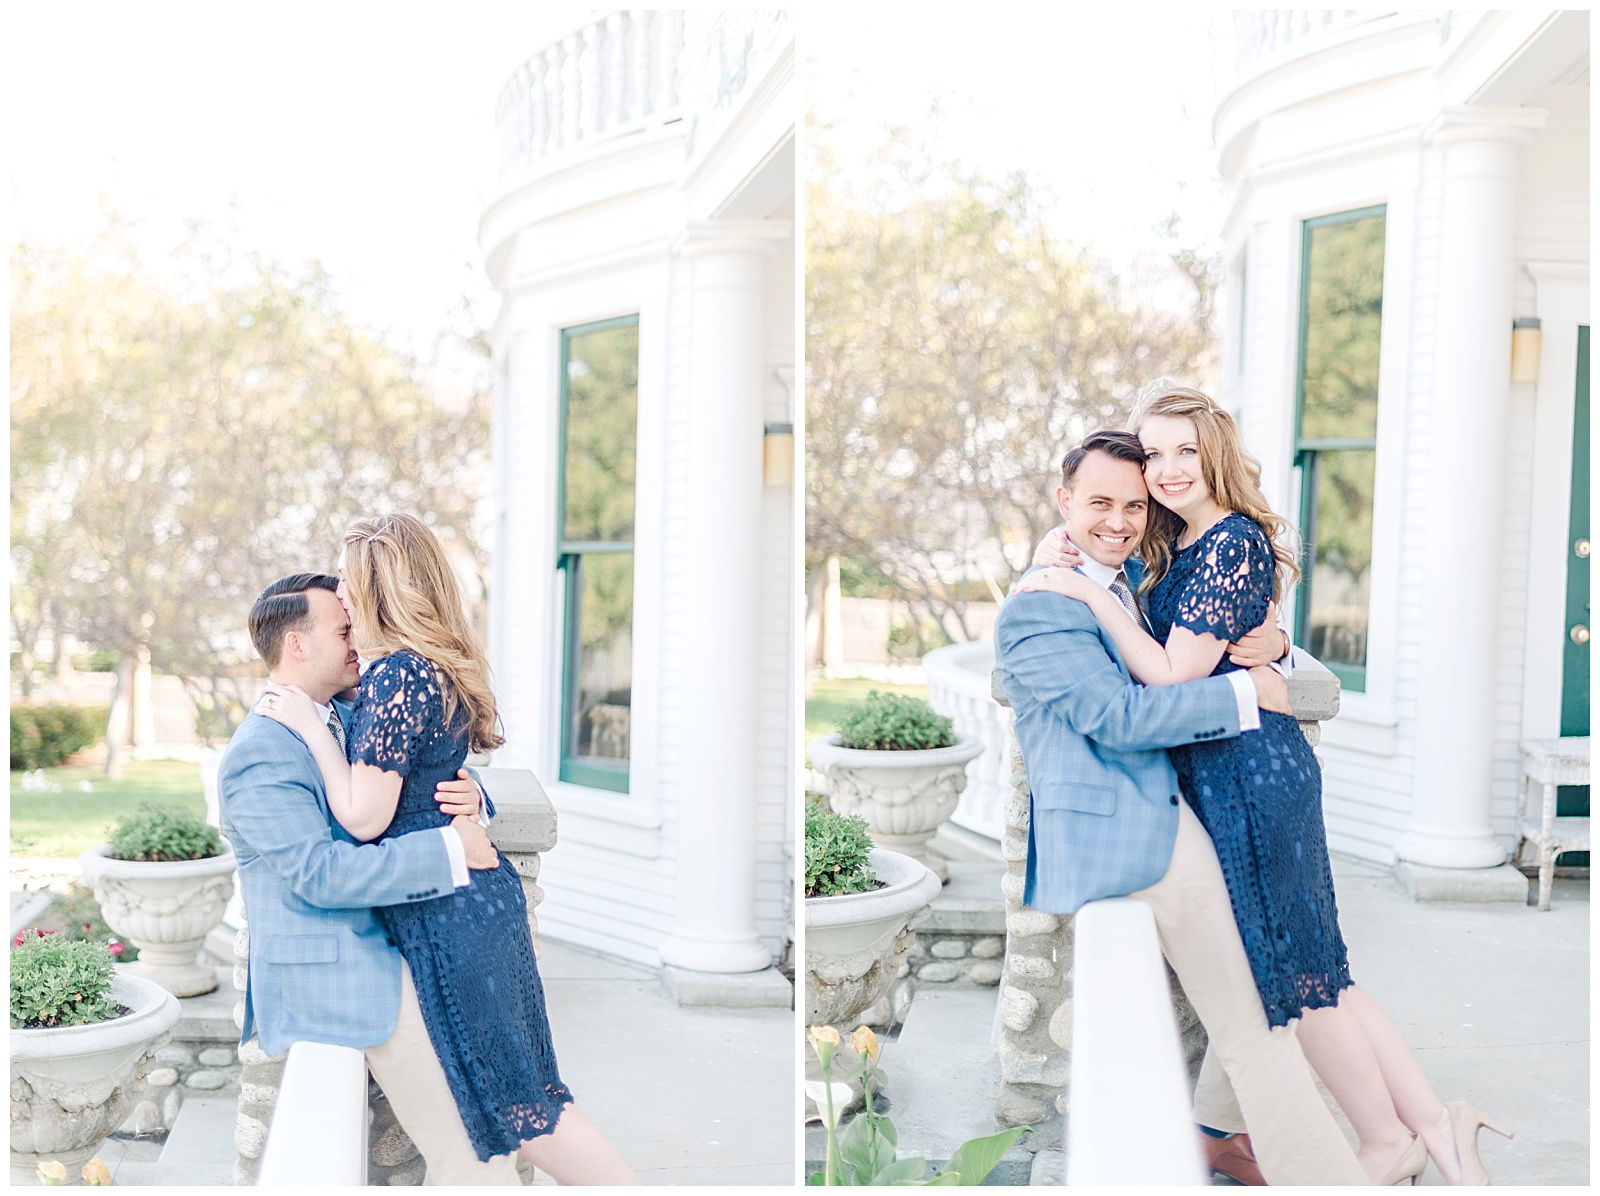 Engagement Session at the Orange County Heritage Museum in Santa Ana California. Photographed by Mollie Jane Photography. To see more go to www.molliejanephotography.com